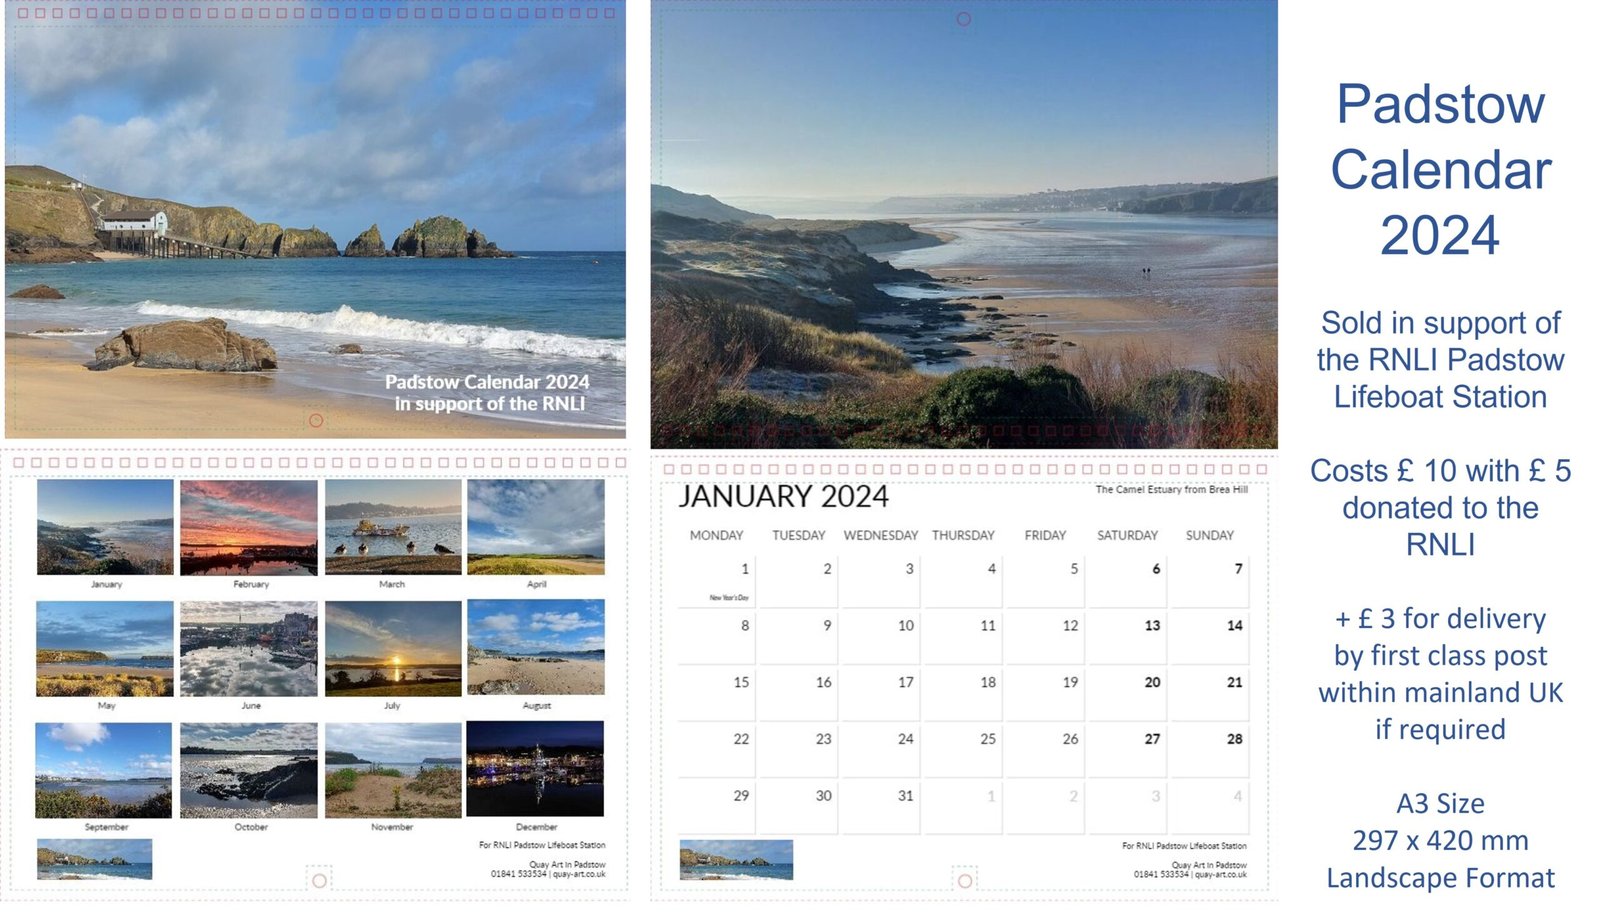 Padstow Calendar 2024 Scaled 